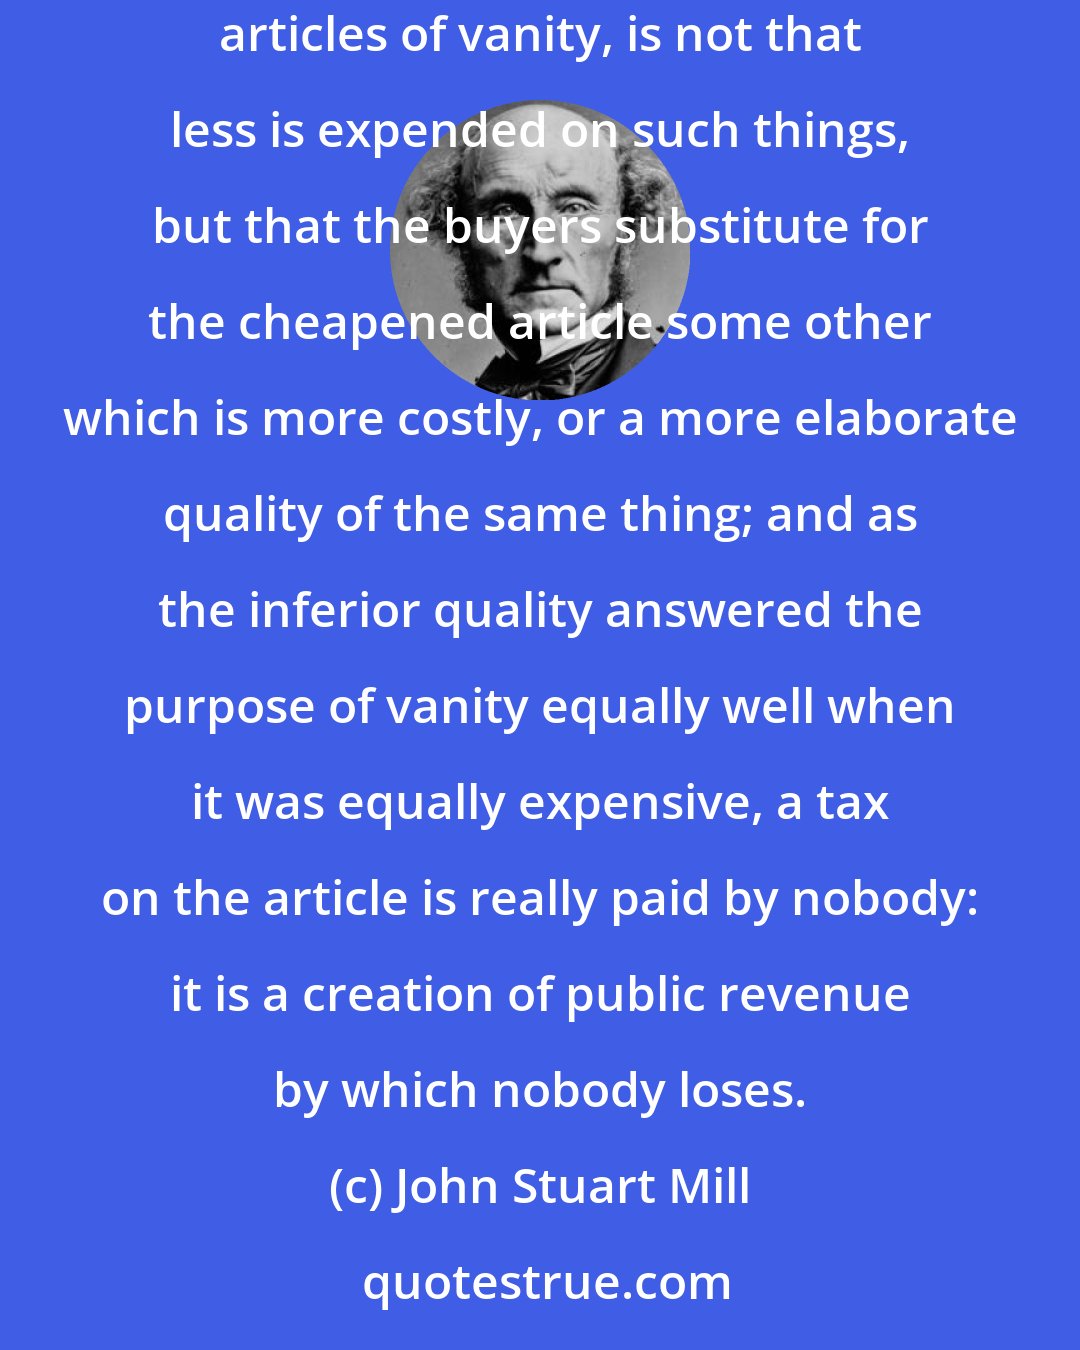 John Stuart Mill: When a thing is bought not for its use but for its costliness, cheapness is no recommendation. As Sismondi remarks, the consequence of cheapening articles of vanity, is not that less is expended on such things, but that the buyers substitute for the cheapened article some other which is more costly, or a more elaborate quality of the same thing; and as the inferior quality answered the purpose of vanity equally well when it was equally expensive, a tax on the article is really paid by nobody: it is a creation of public revenue by which nobody loses.